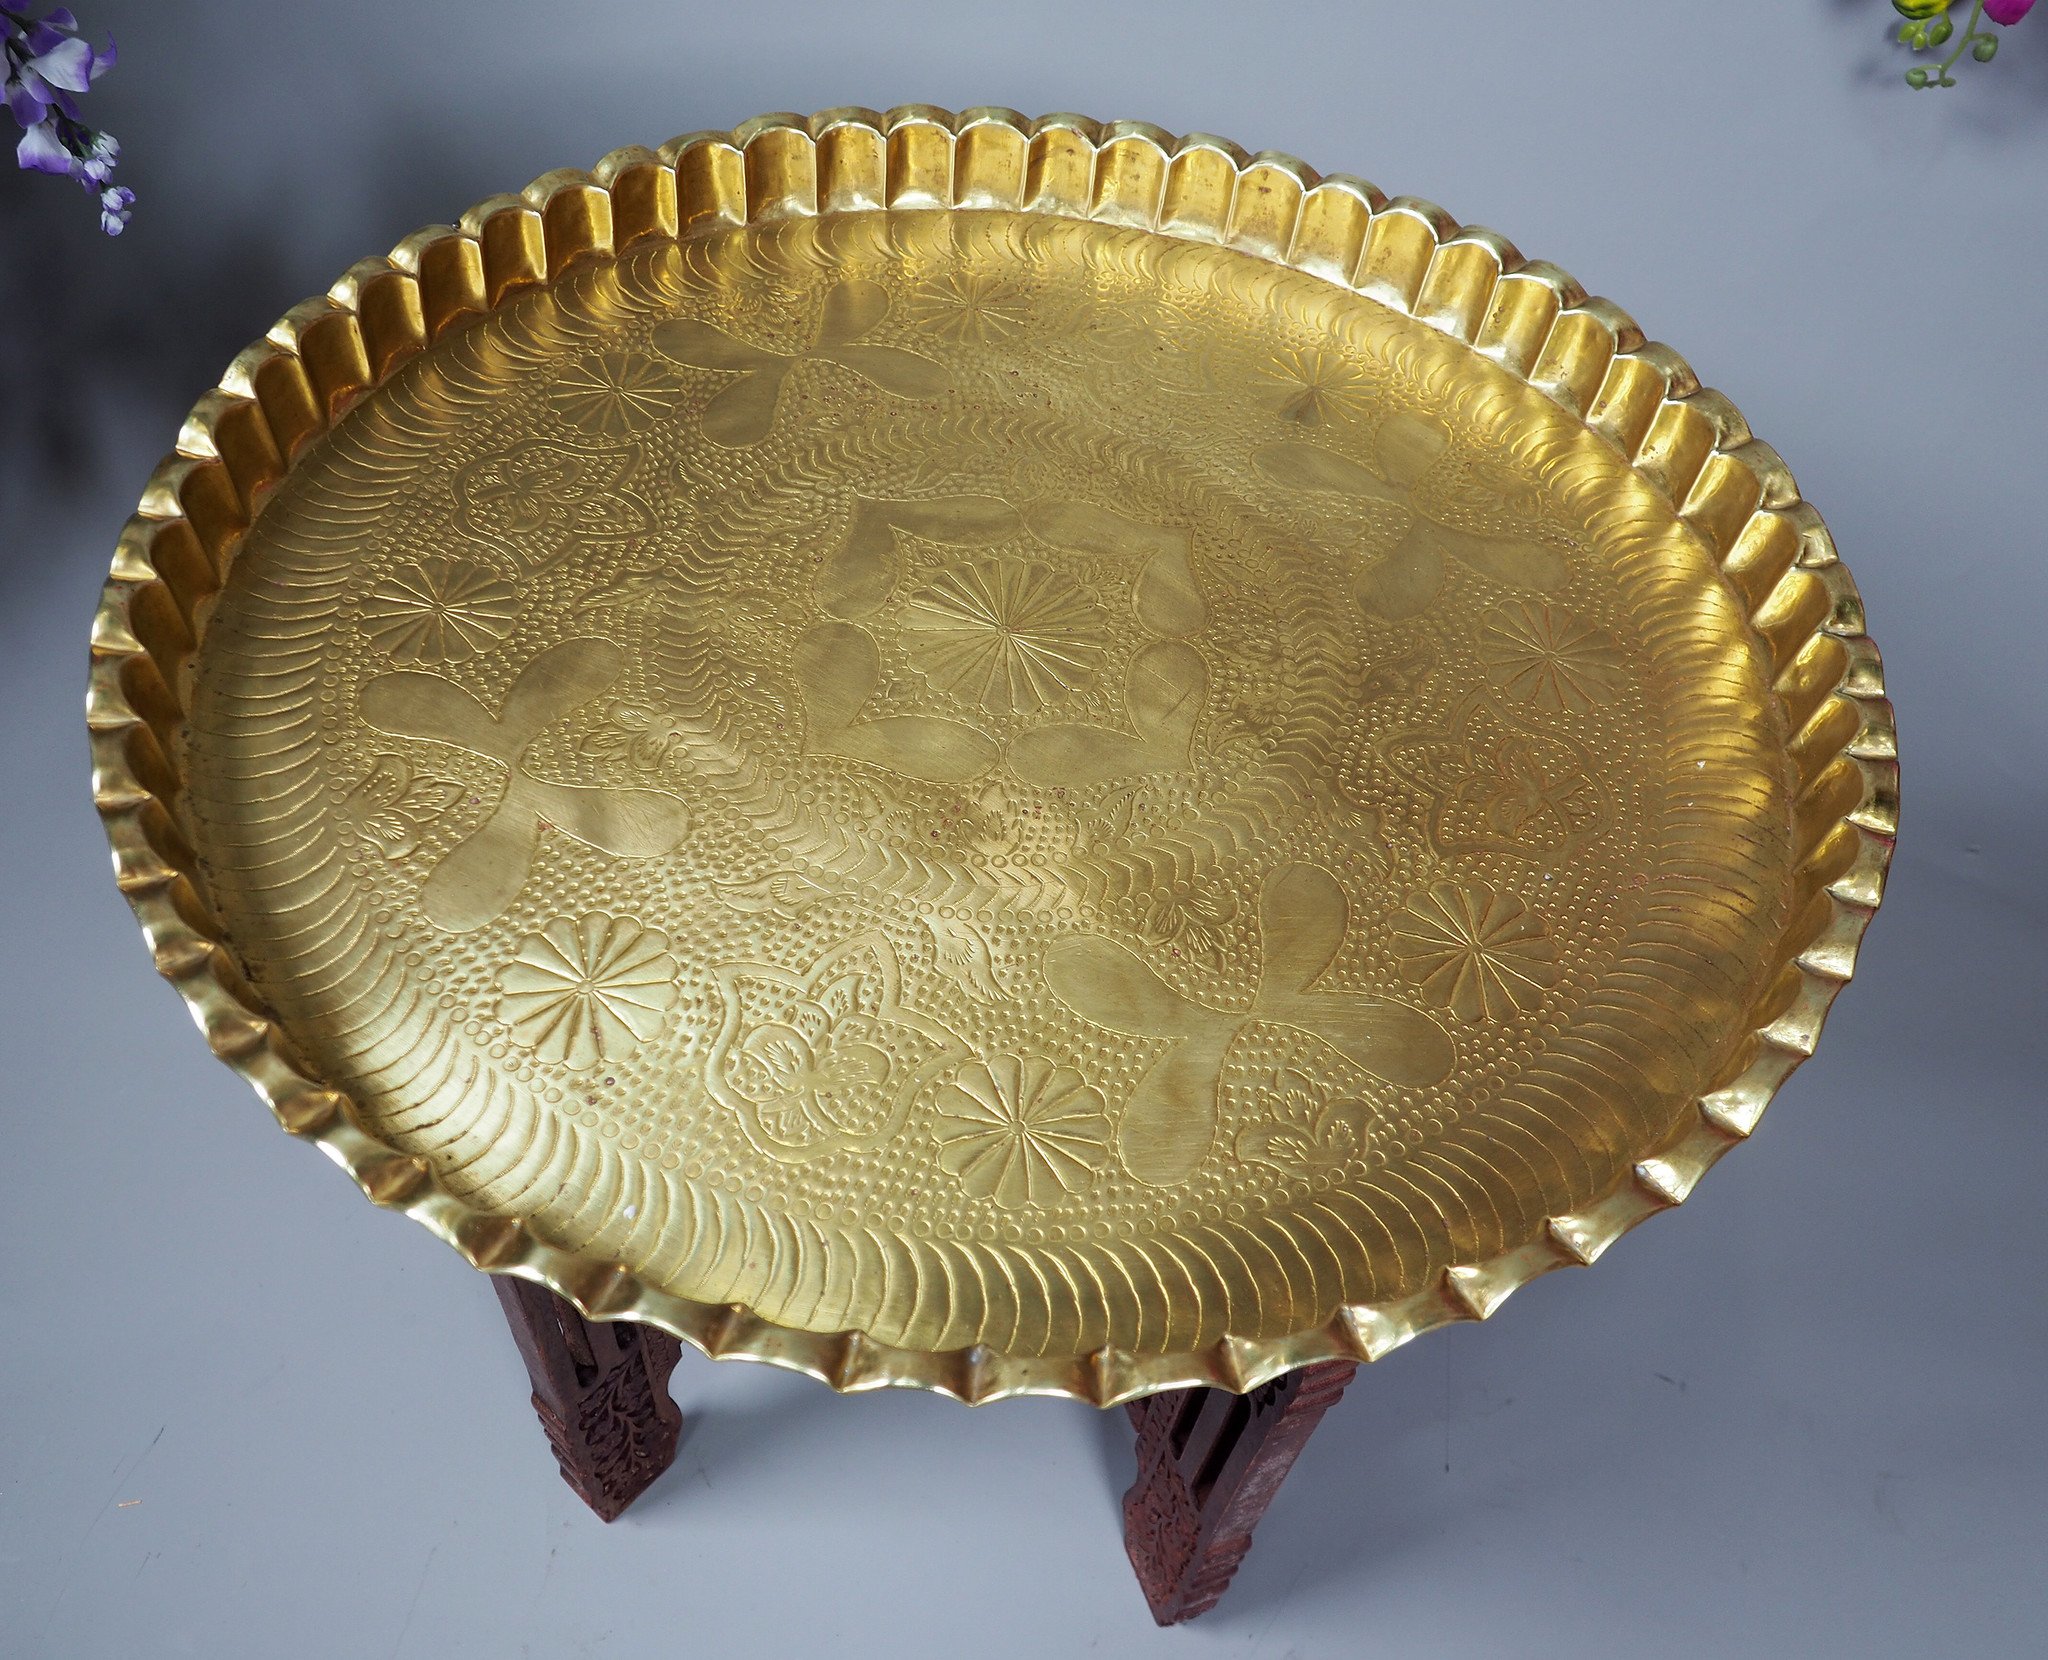 55 cm Antique ottoman orient Islamic  Hammer Engraved Brass table Tea table side table Tray from Afghanistan  No-21/G